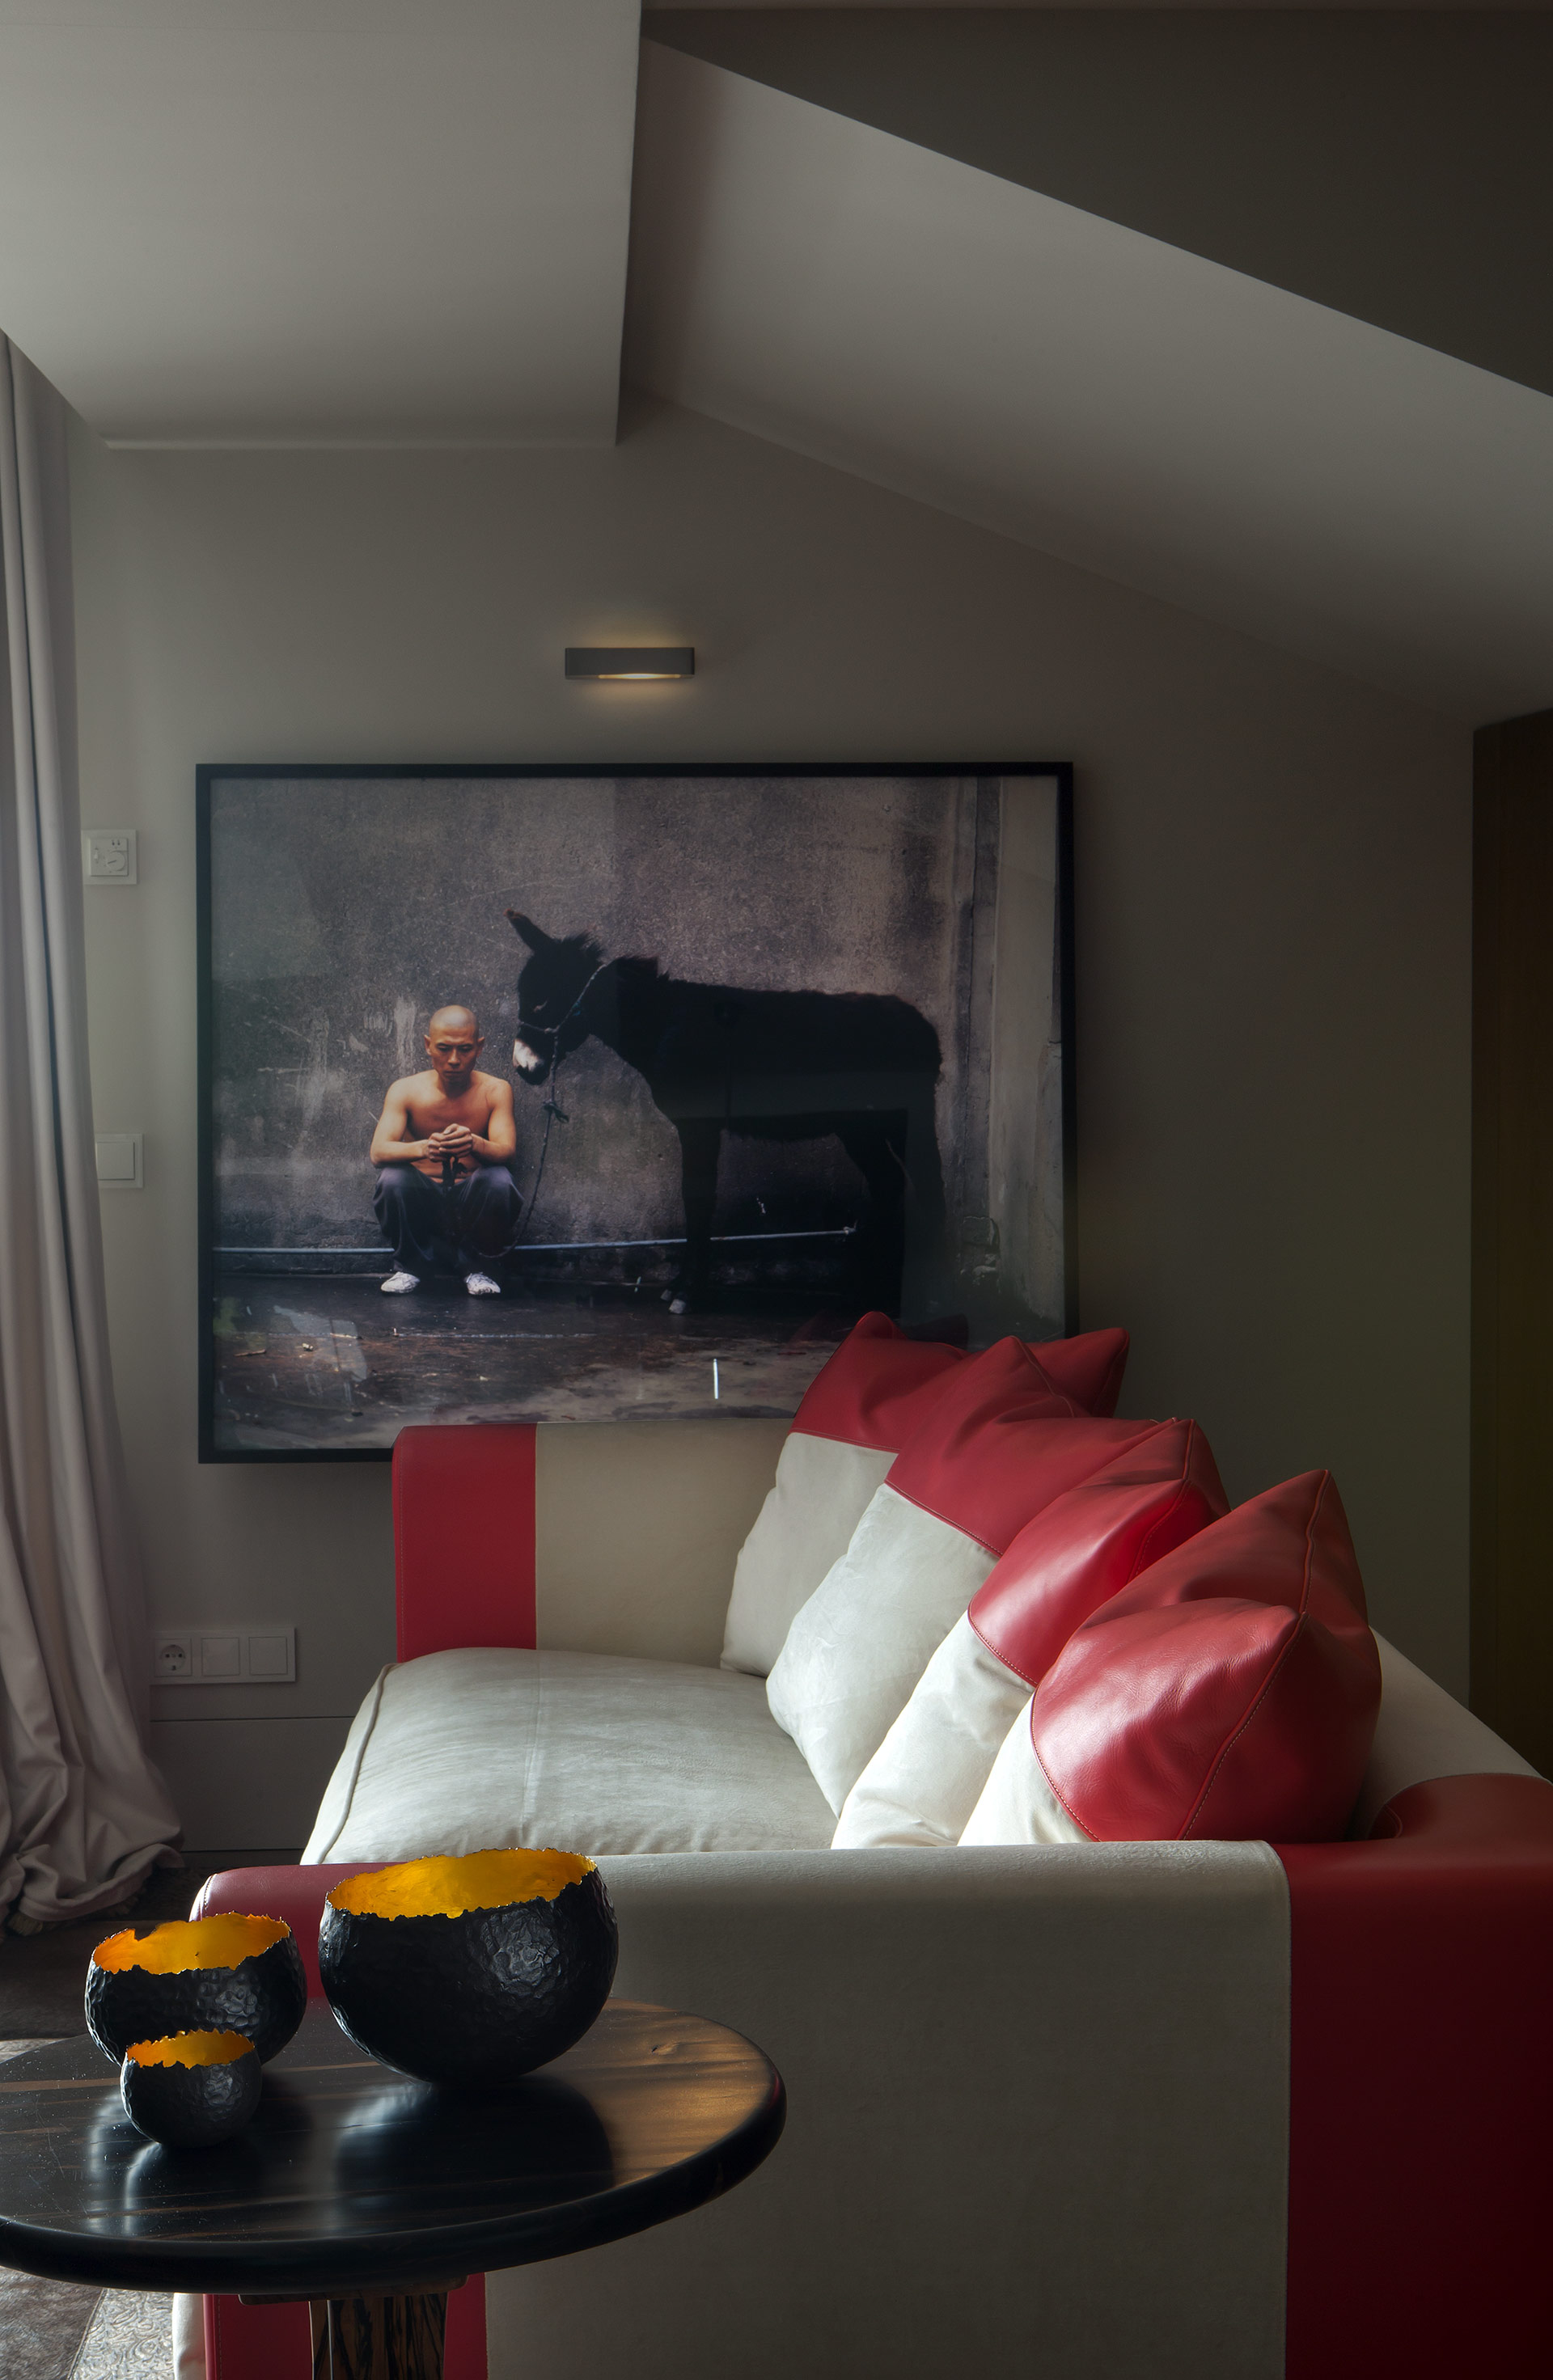 Living room in a private residence in Austria furnished with Promemoria | Promemoria